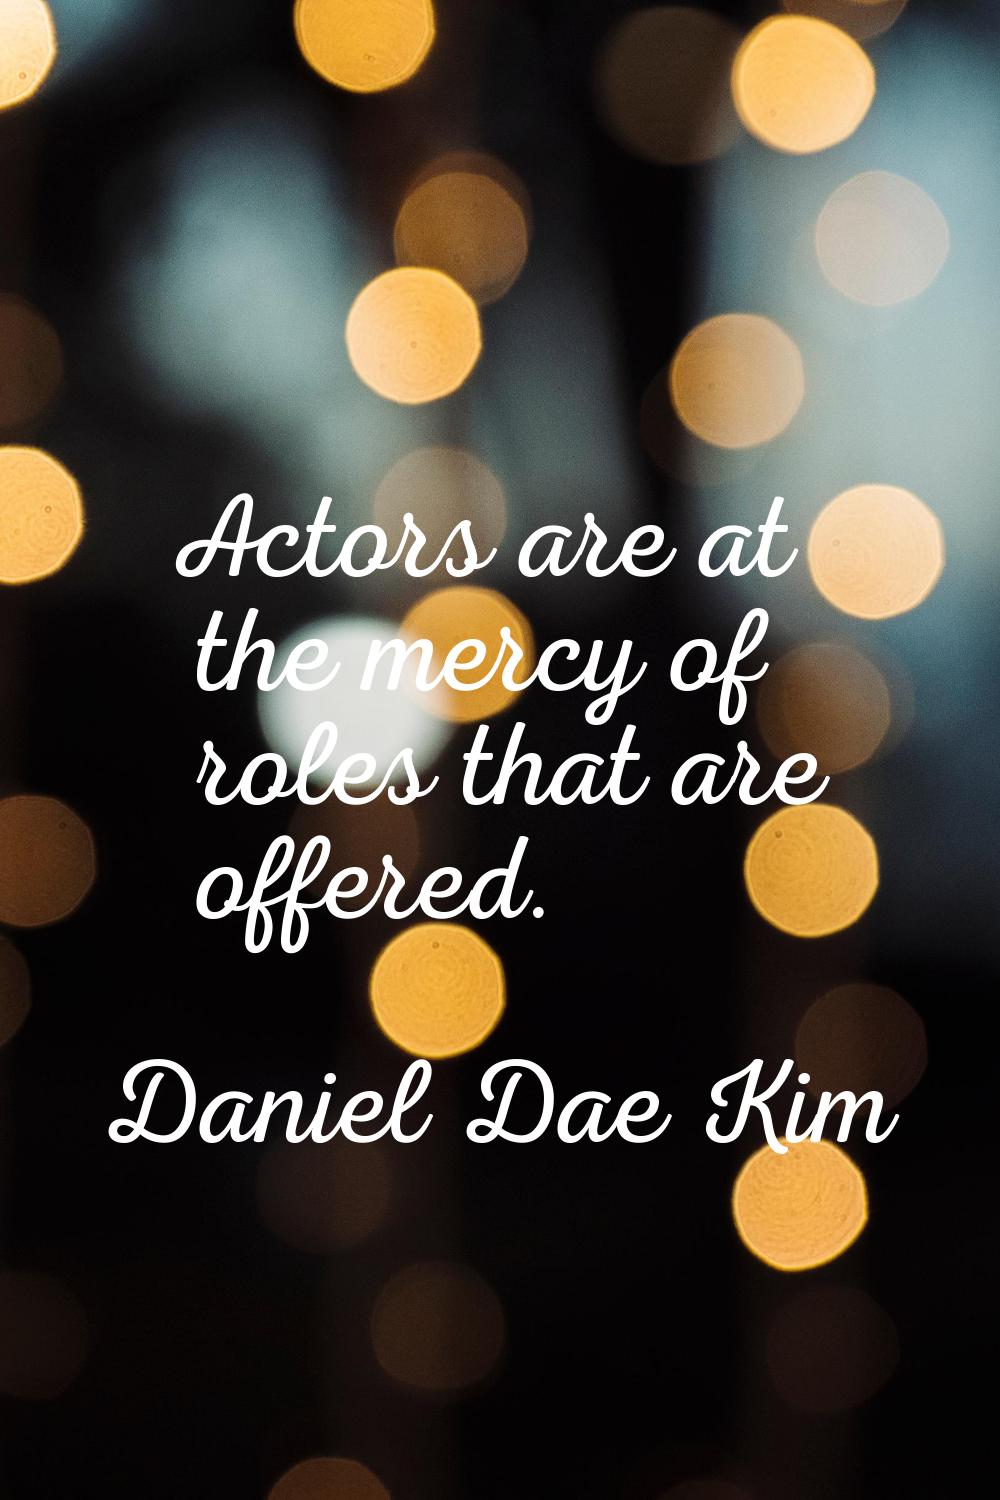 Actors are at the mercy of roles that are offered.